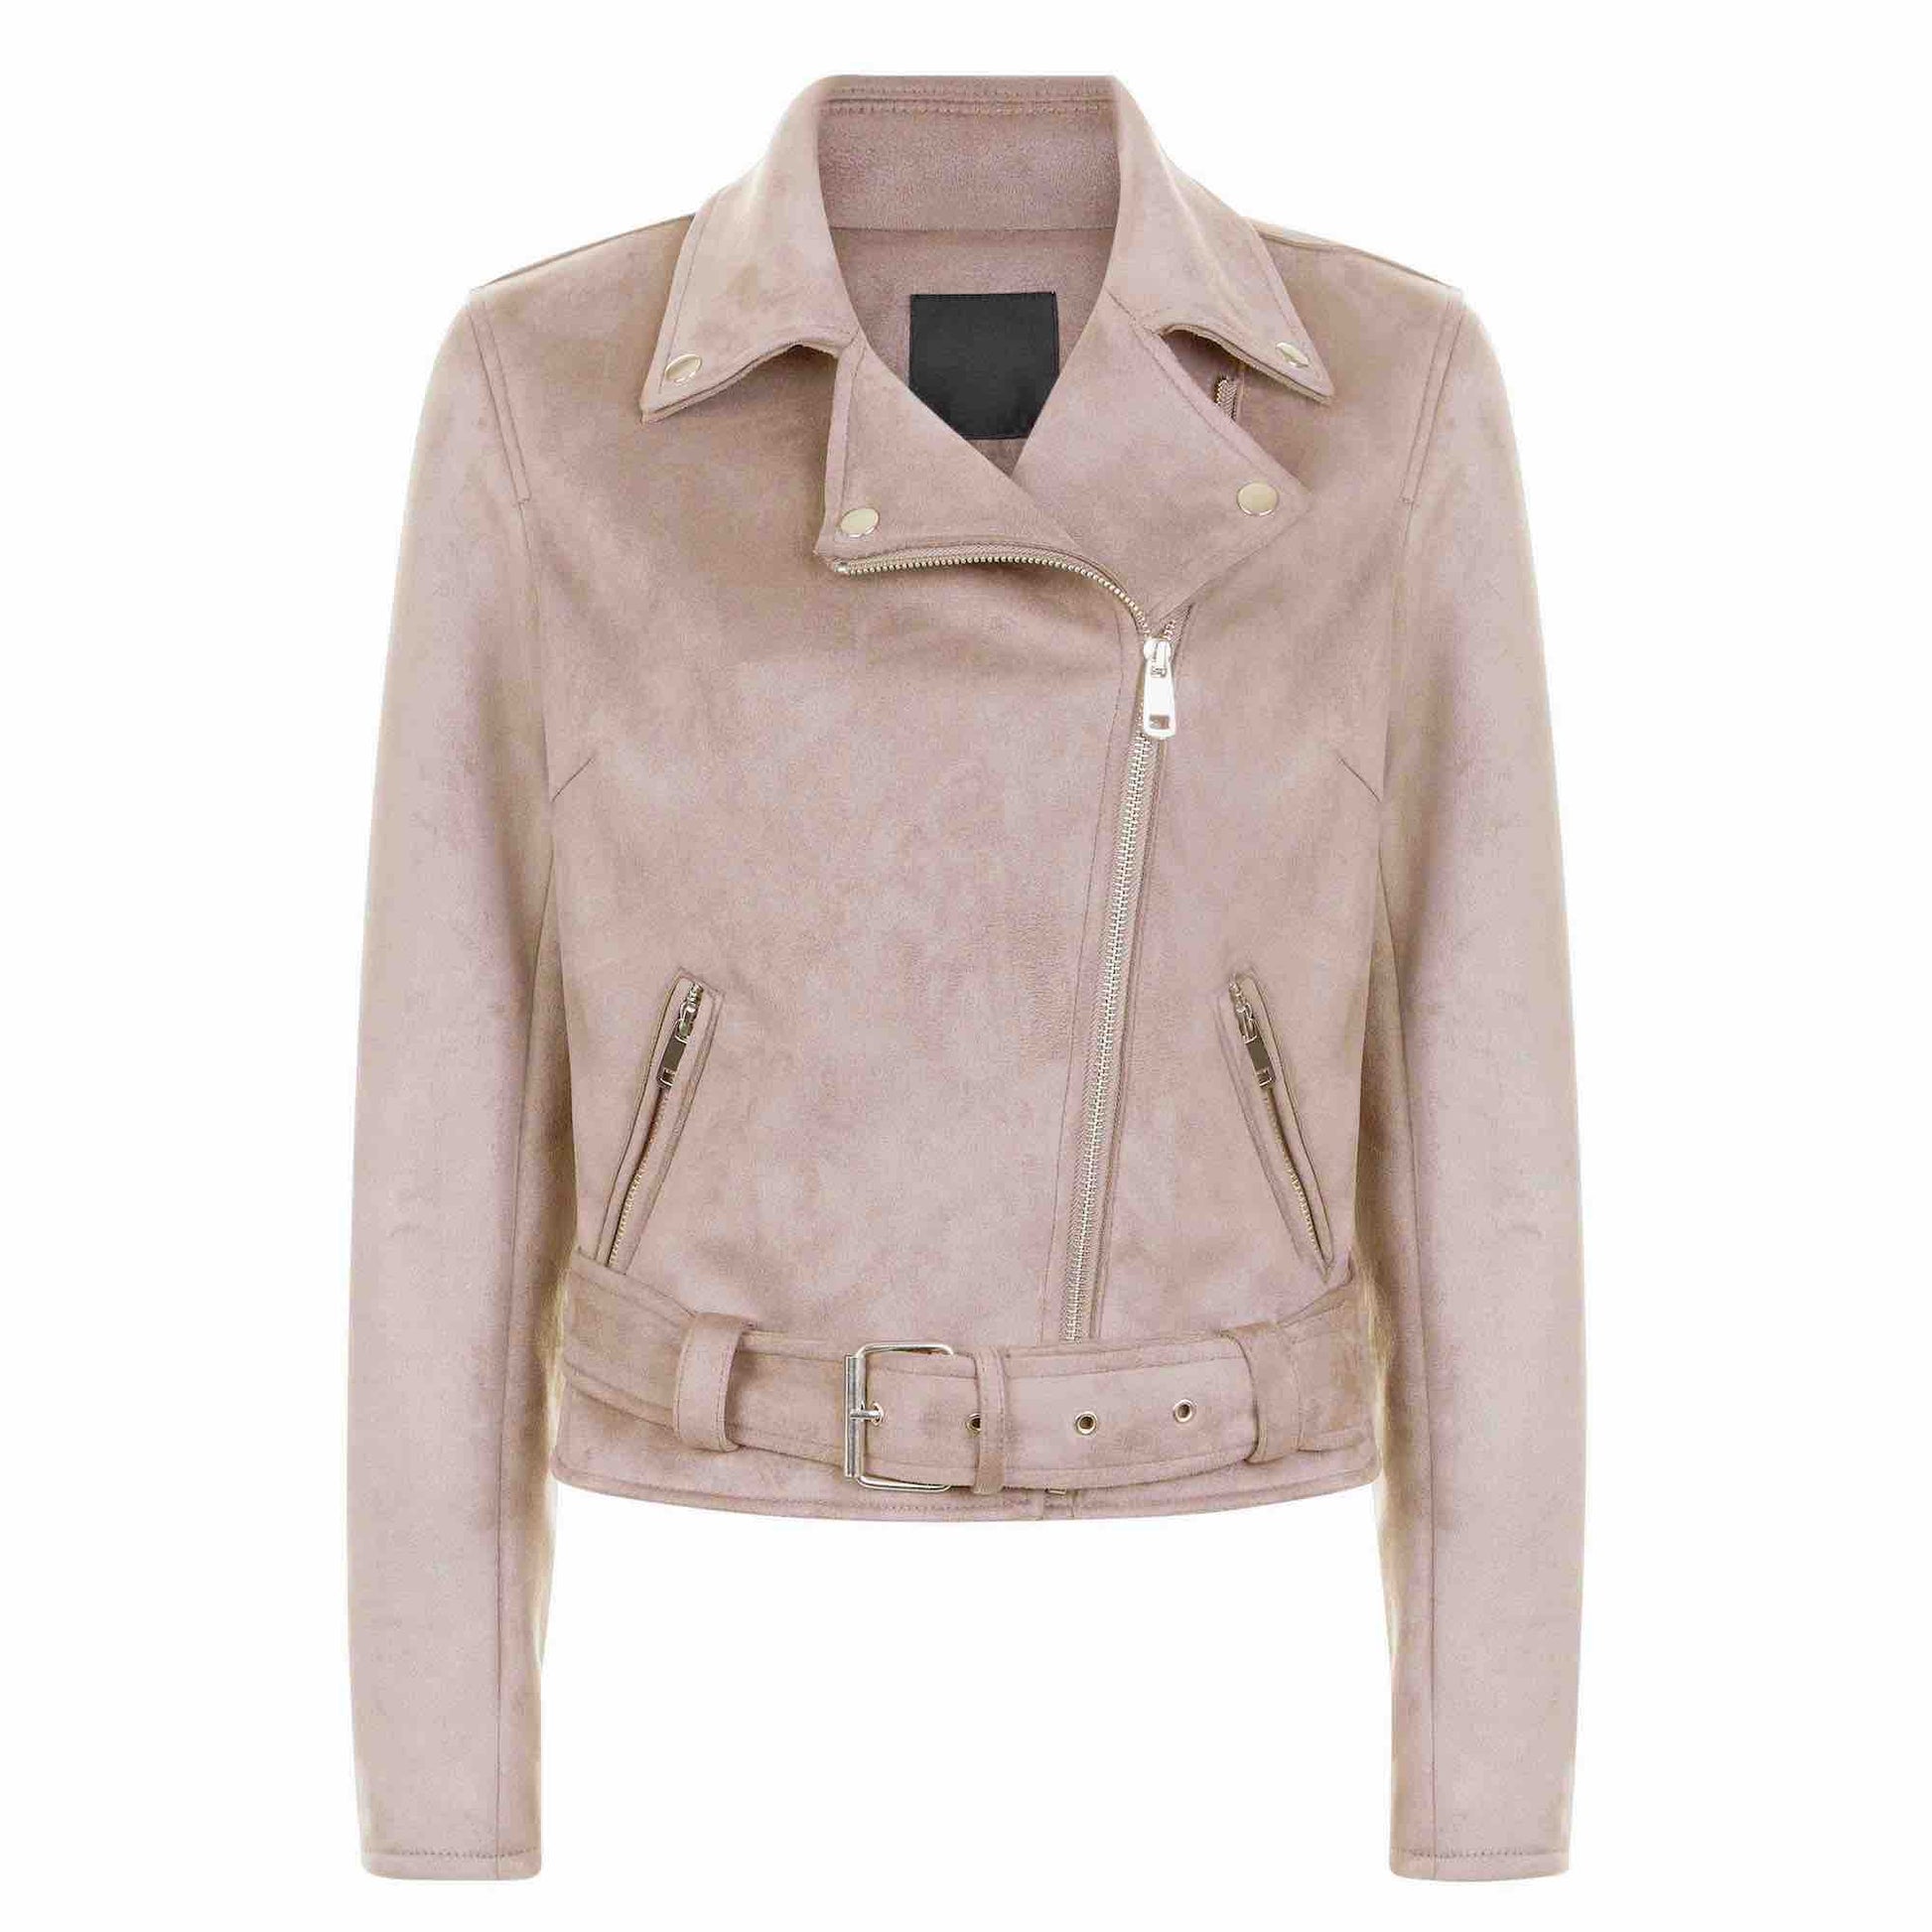 Suede Jacket pink pretty cleaning services LeathercareUSA.com